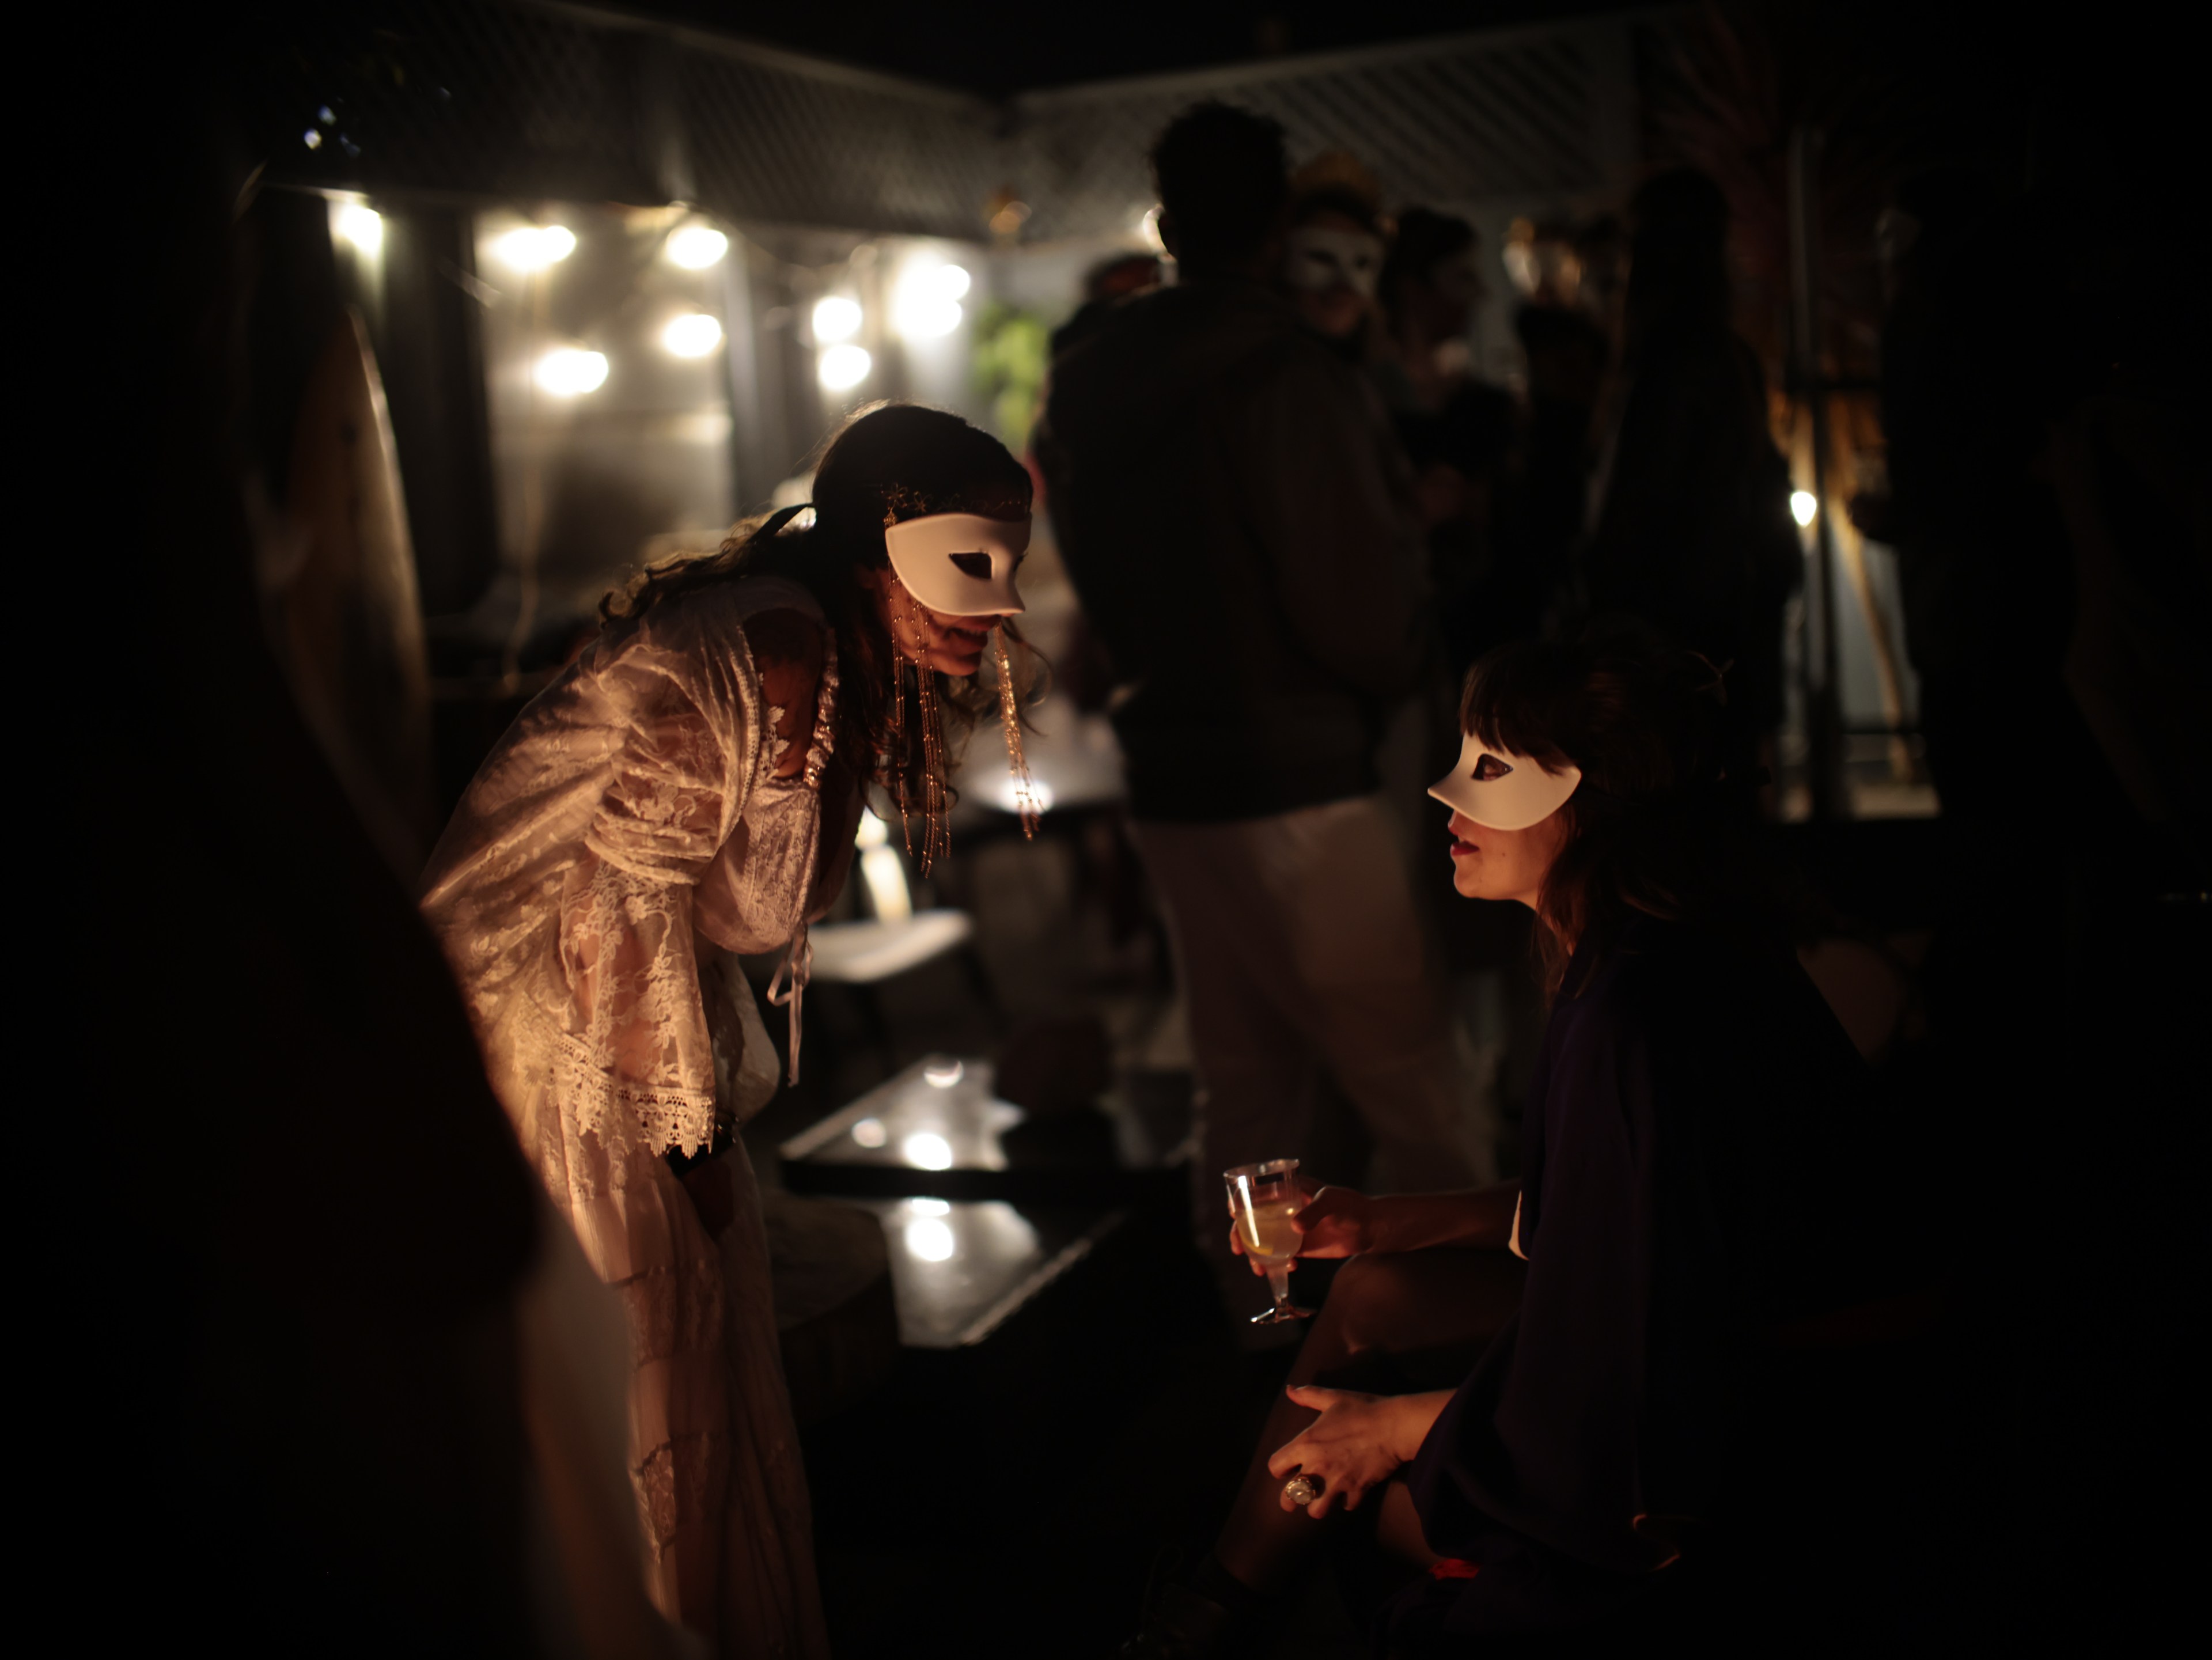 Two people wearing masks talk at a dimly lit party; one is seated with a drink, the other stands leaning in.